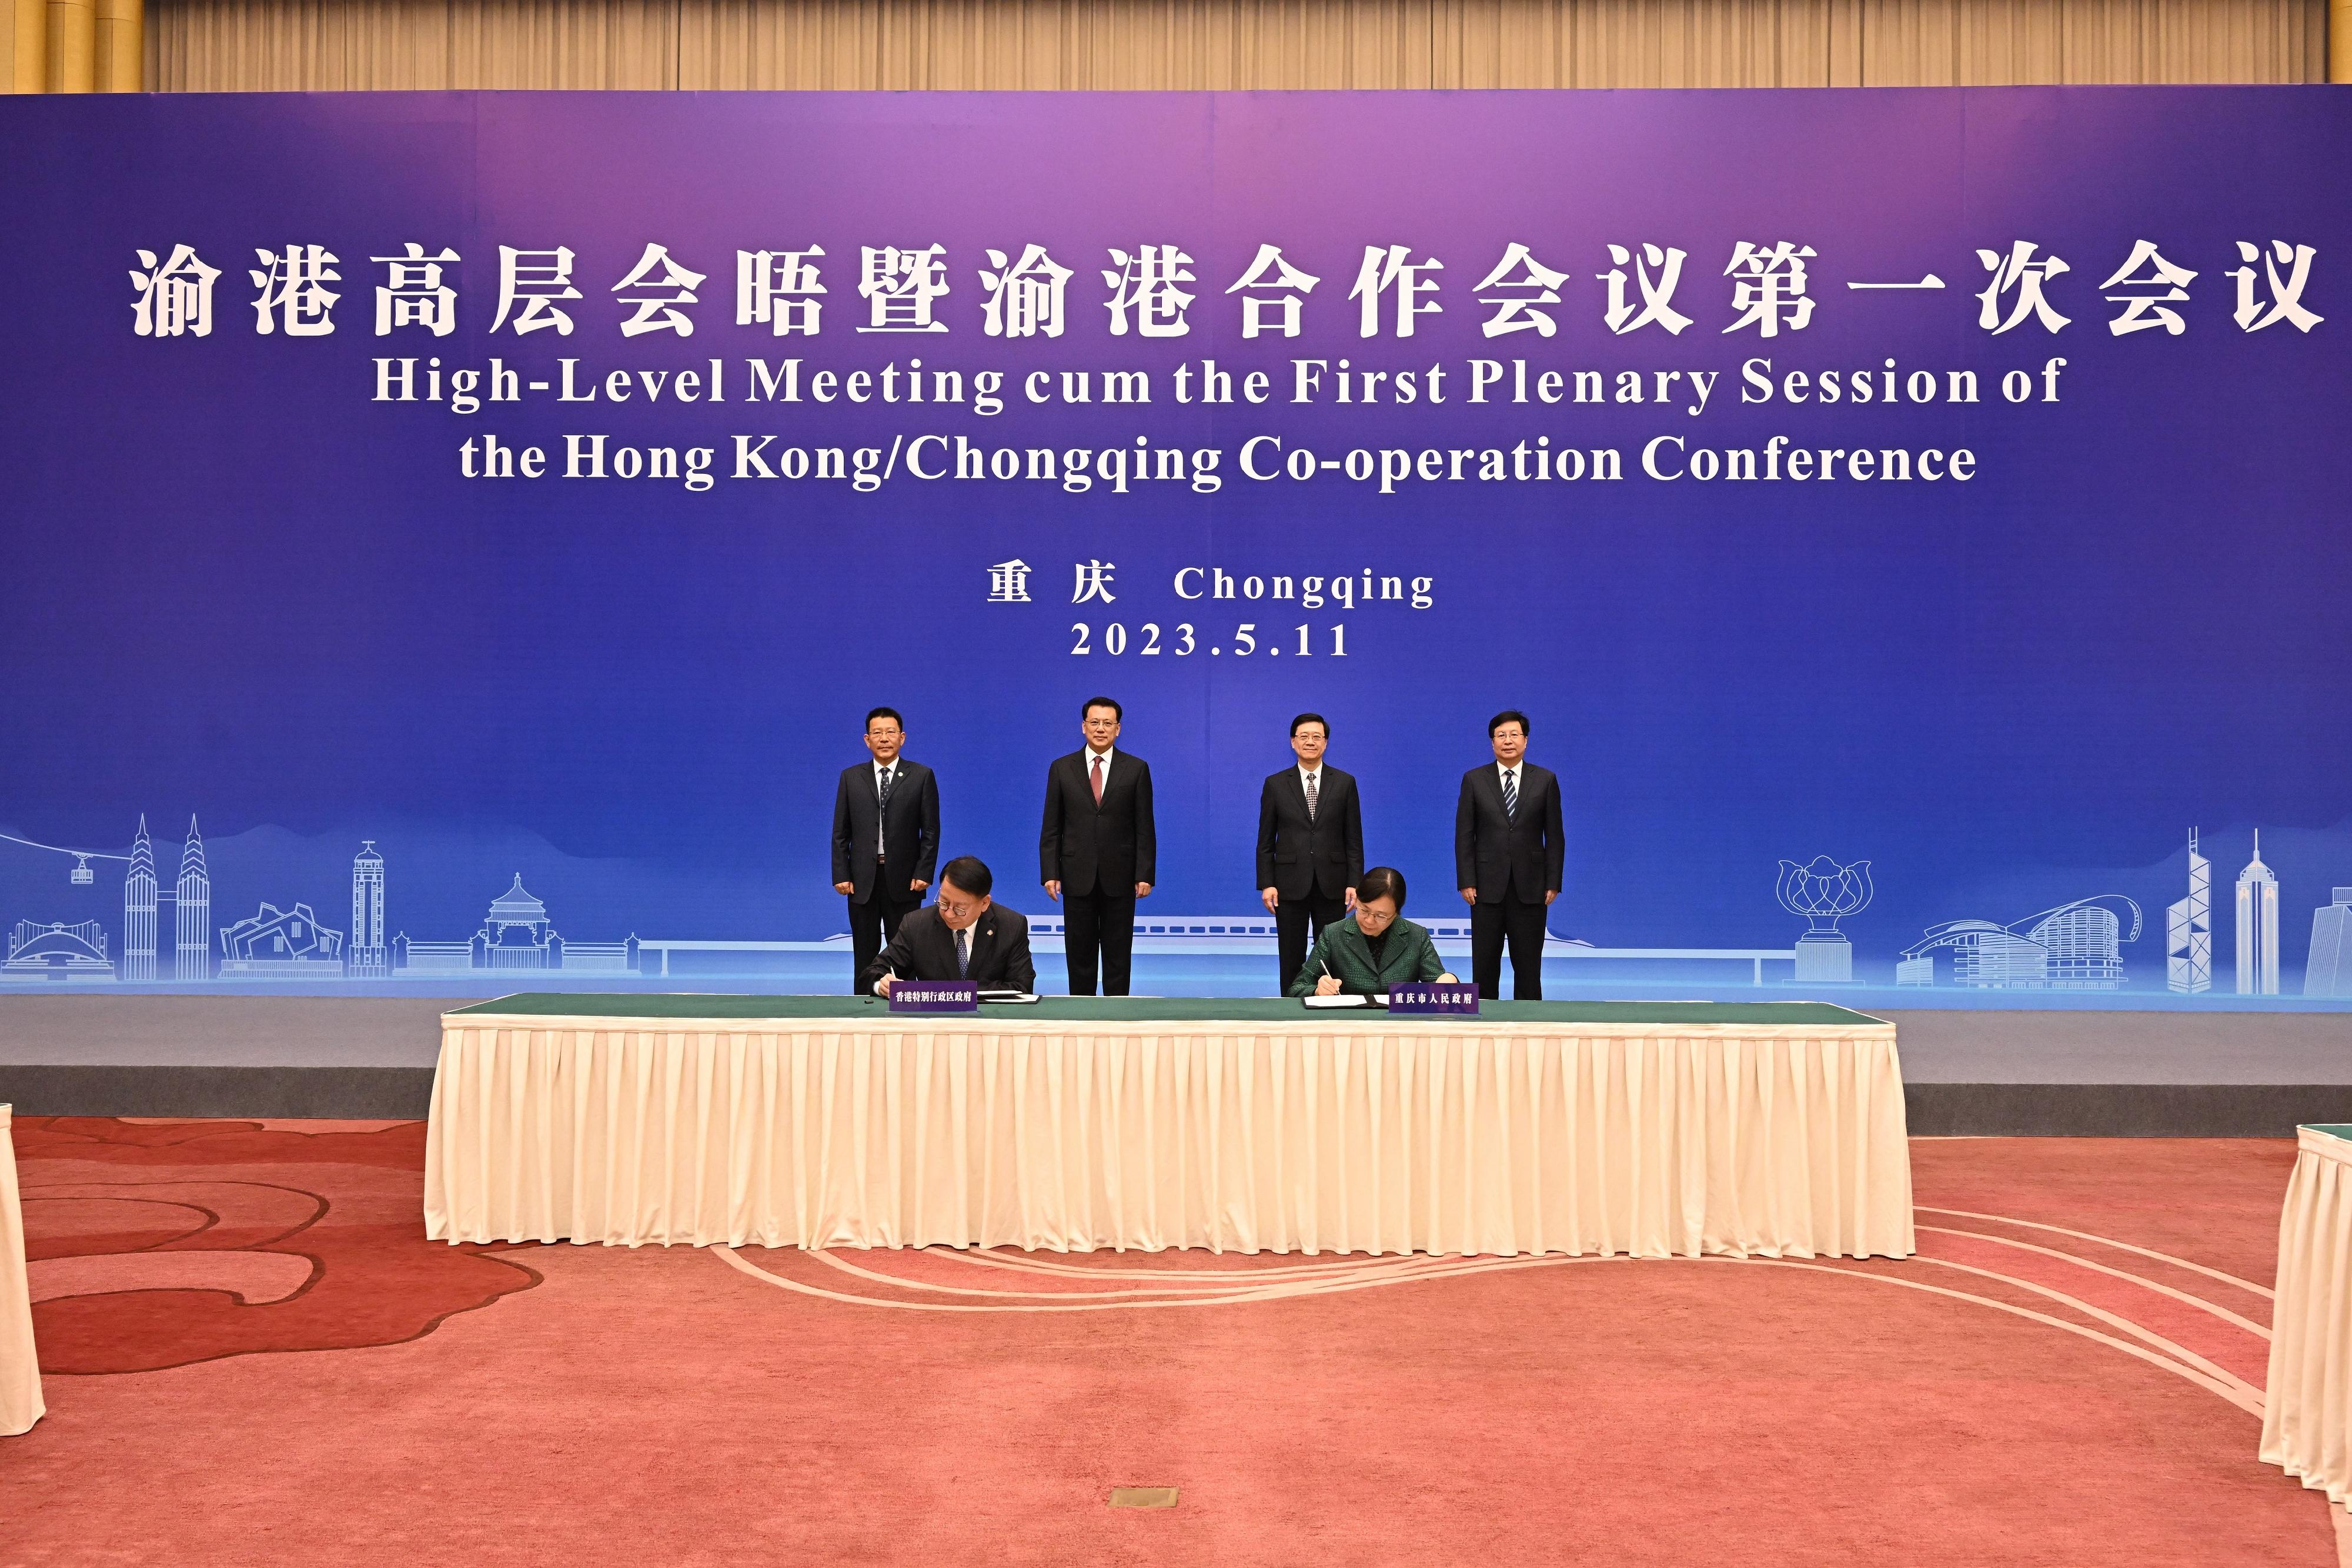 The Chief Executive, Mr John Lee, attended the High-Level Meeting cum First Plenary Session of the Hong Kong/Chongqing Co-operation Conference in Chongqing today (May 11). Photo shows (second row, from left) Deputy Director of the Hong Kong and Macao Affairs Office of the State Council Mr Wang Linggui; the Secretary of the CPC Chongqing Municipal Committee, Mr Yuan Jiajun; Mr Lee; and the Mayor of Chongqing, Mr Hu Henghua, witnessing the signing of the "Hong Kong/Chongqing Co-operation Conference Mechanism" and the "Co-operation Memorandum of the High-Level Meeting cum First Plenary Session of the Hong Kong/Chongqing Co-operation Conference" by the Chief Secretary for Administration, Mr Chan Kwok-ki (front row, left) and Vice Mayor of Chongqing Municipal People's Government Ms Zhang Guozhi (front row, right).